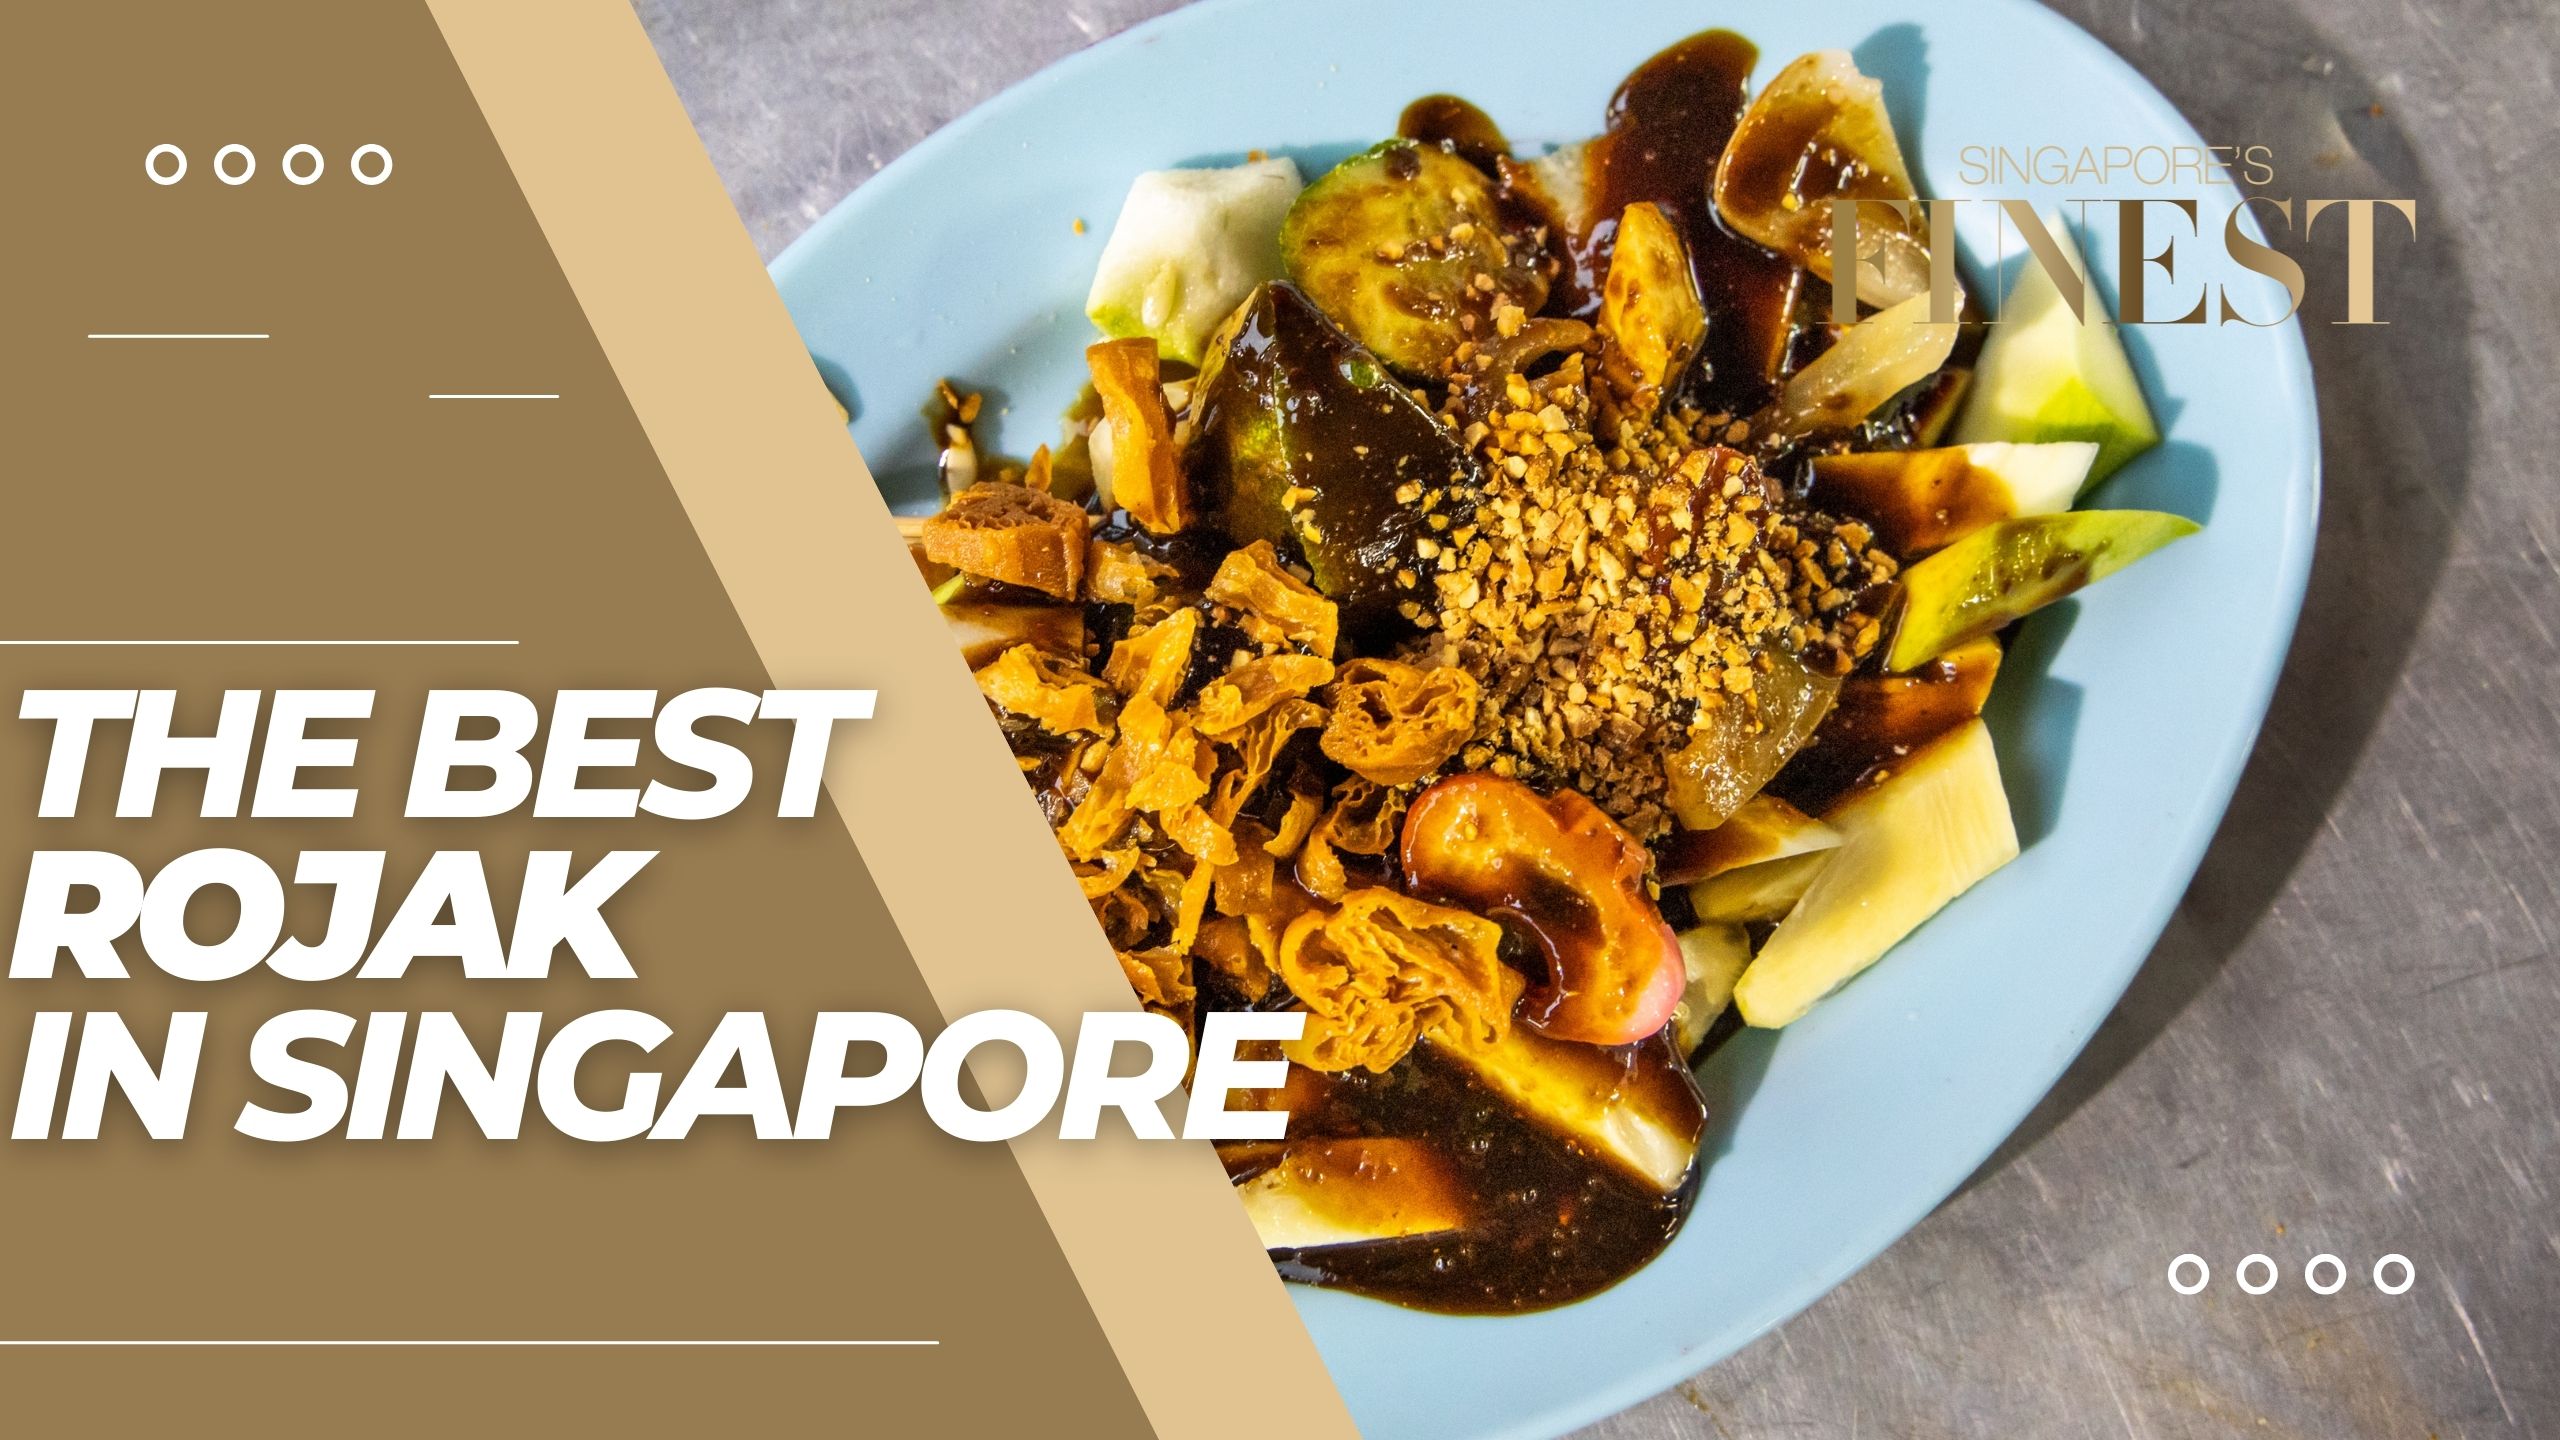 The Finest Rojak in Singapore